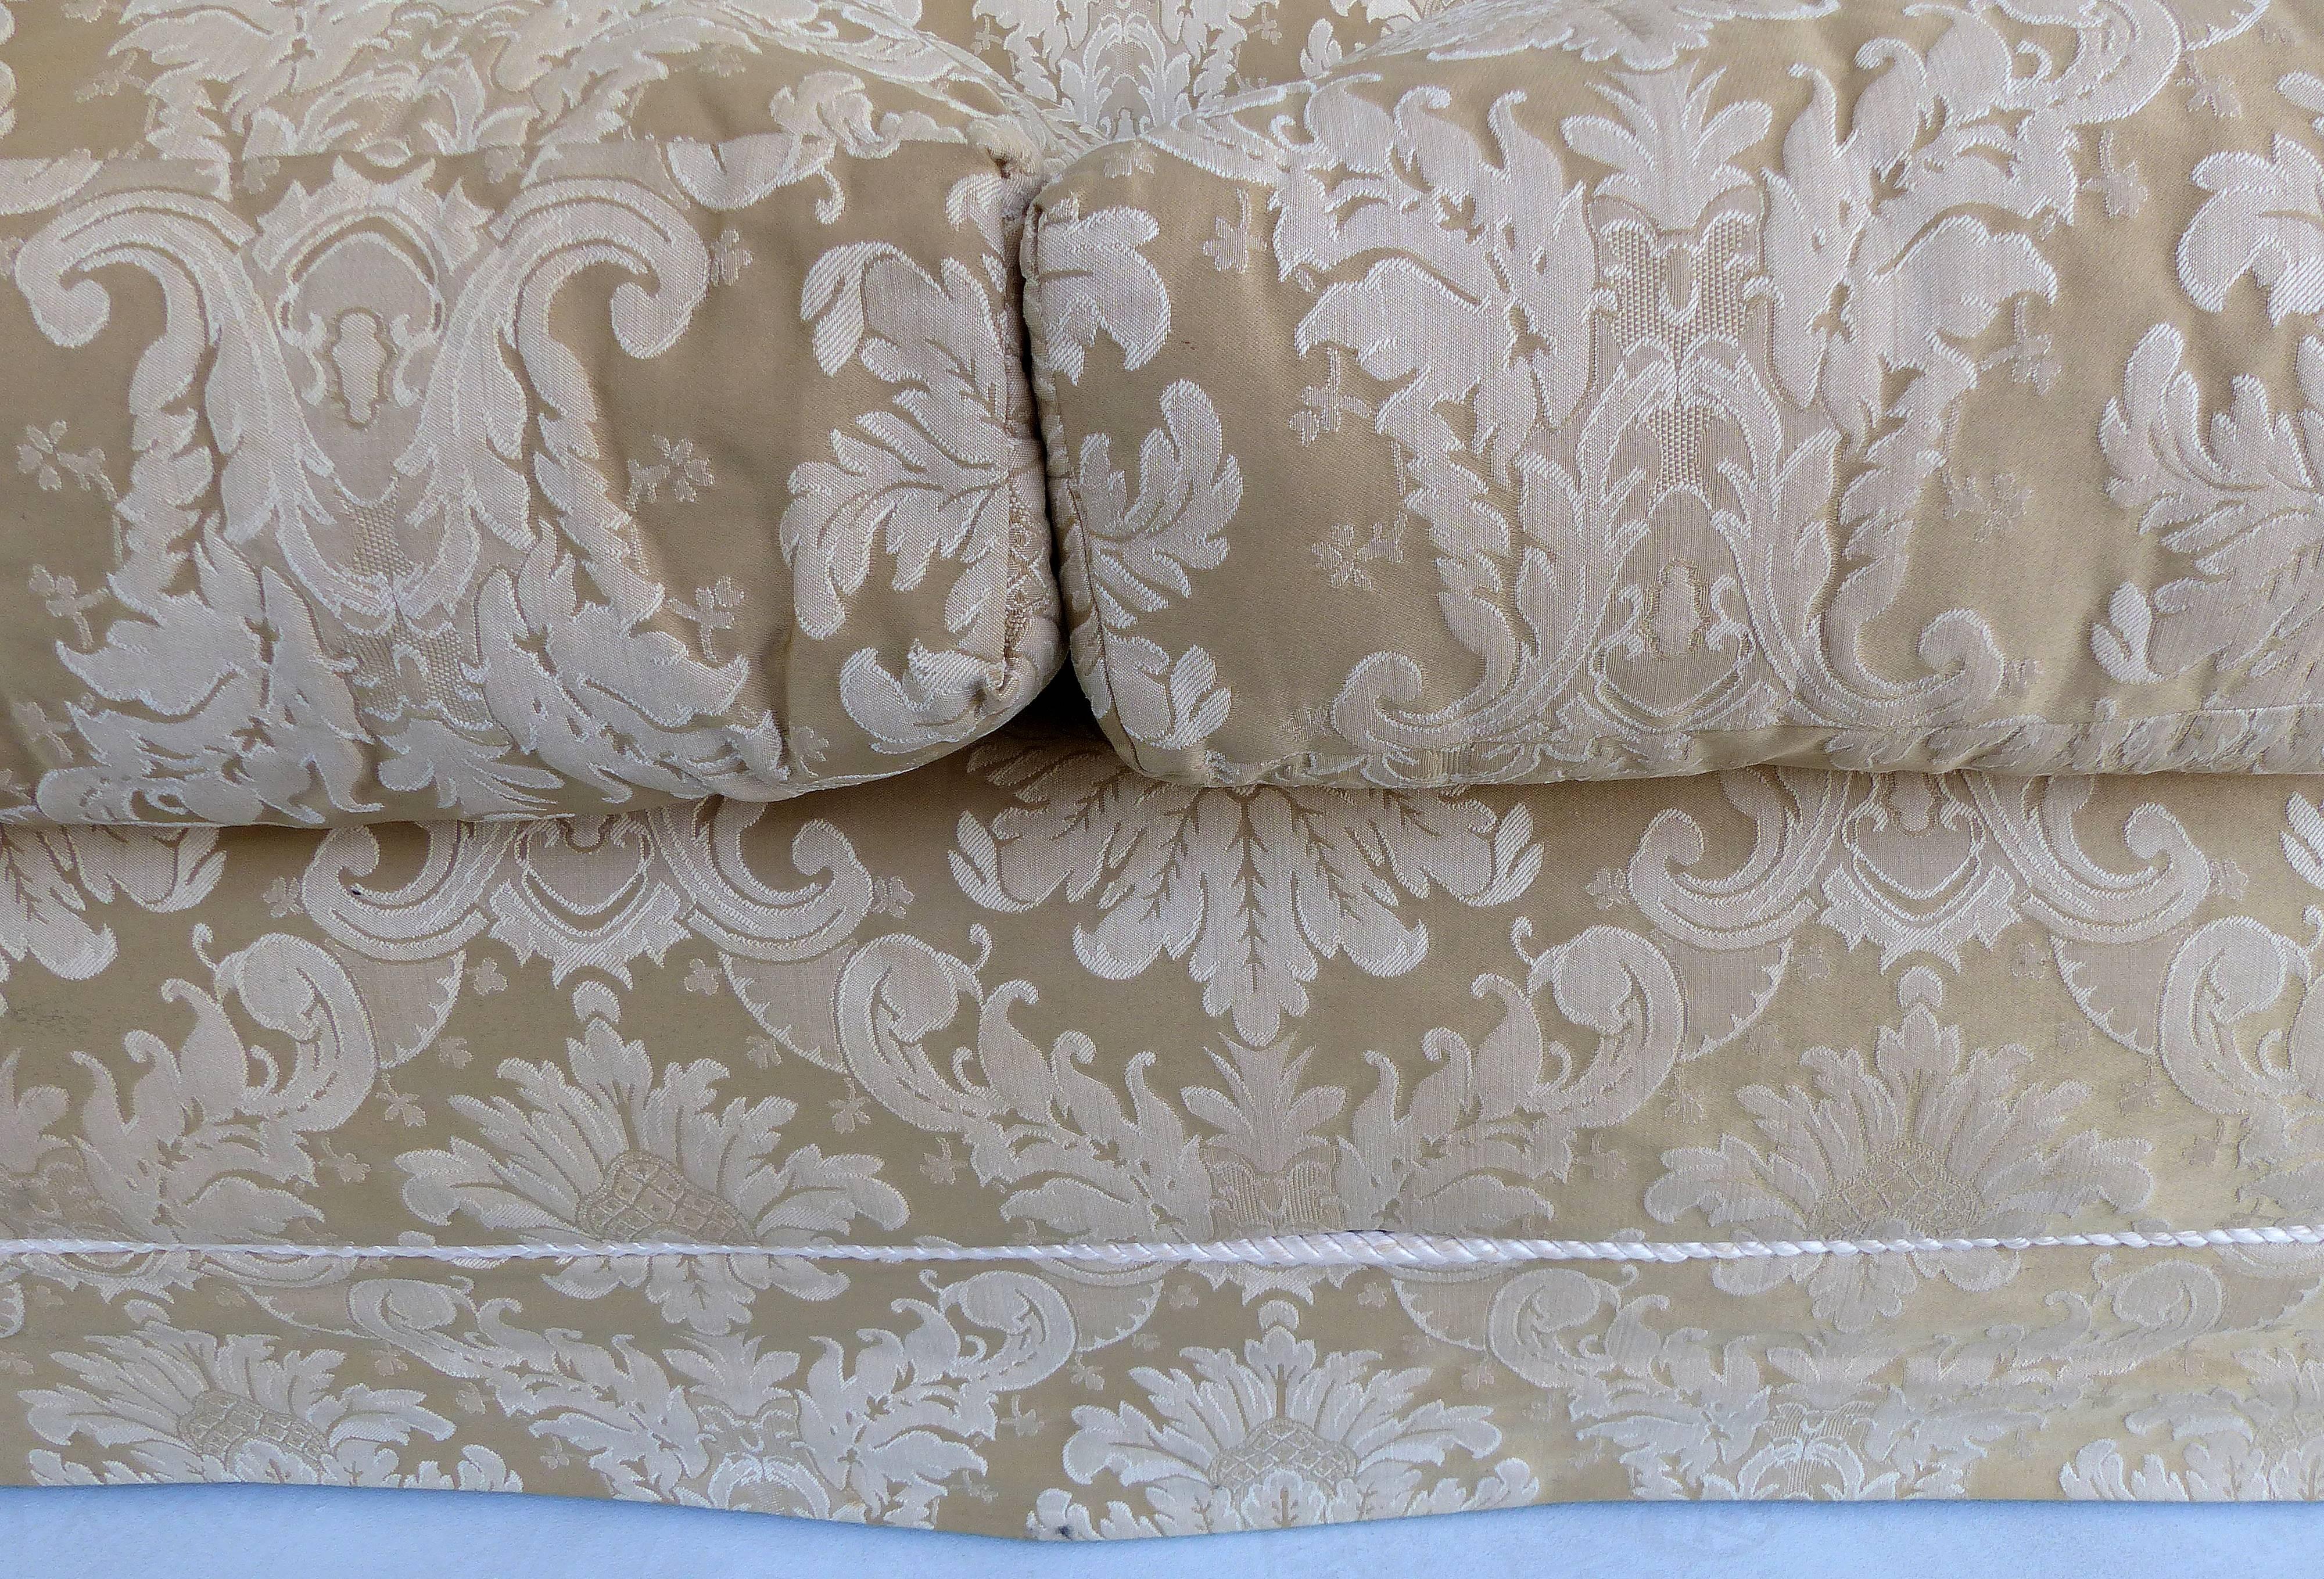 Damask Upholstered Plush Sofa with Rope Trim and Pleated Skirt 1